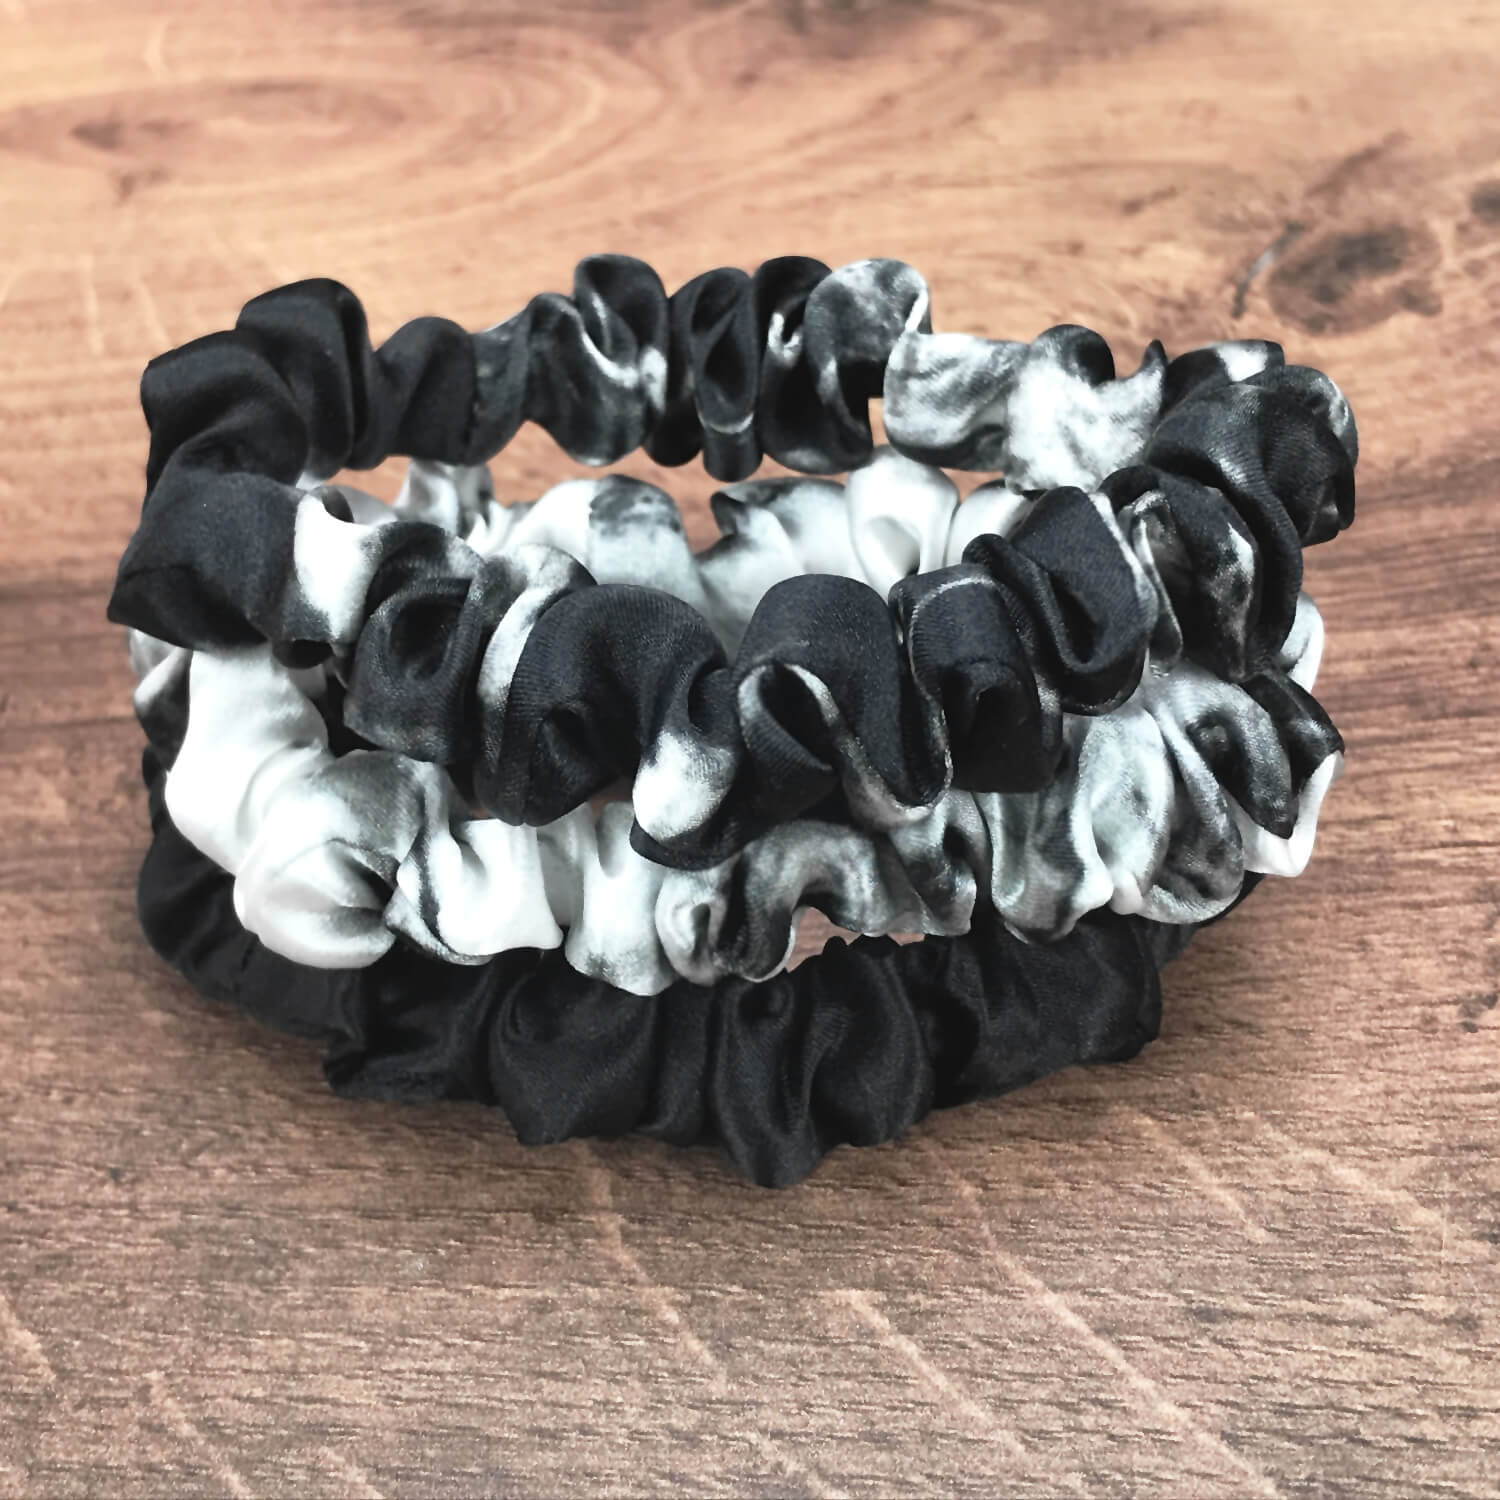 thin white marble black marble and black silk hair ties by Celestial Silk stacked in a pile on a wood vanity